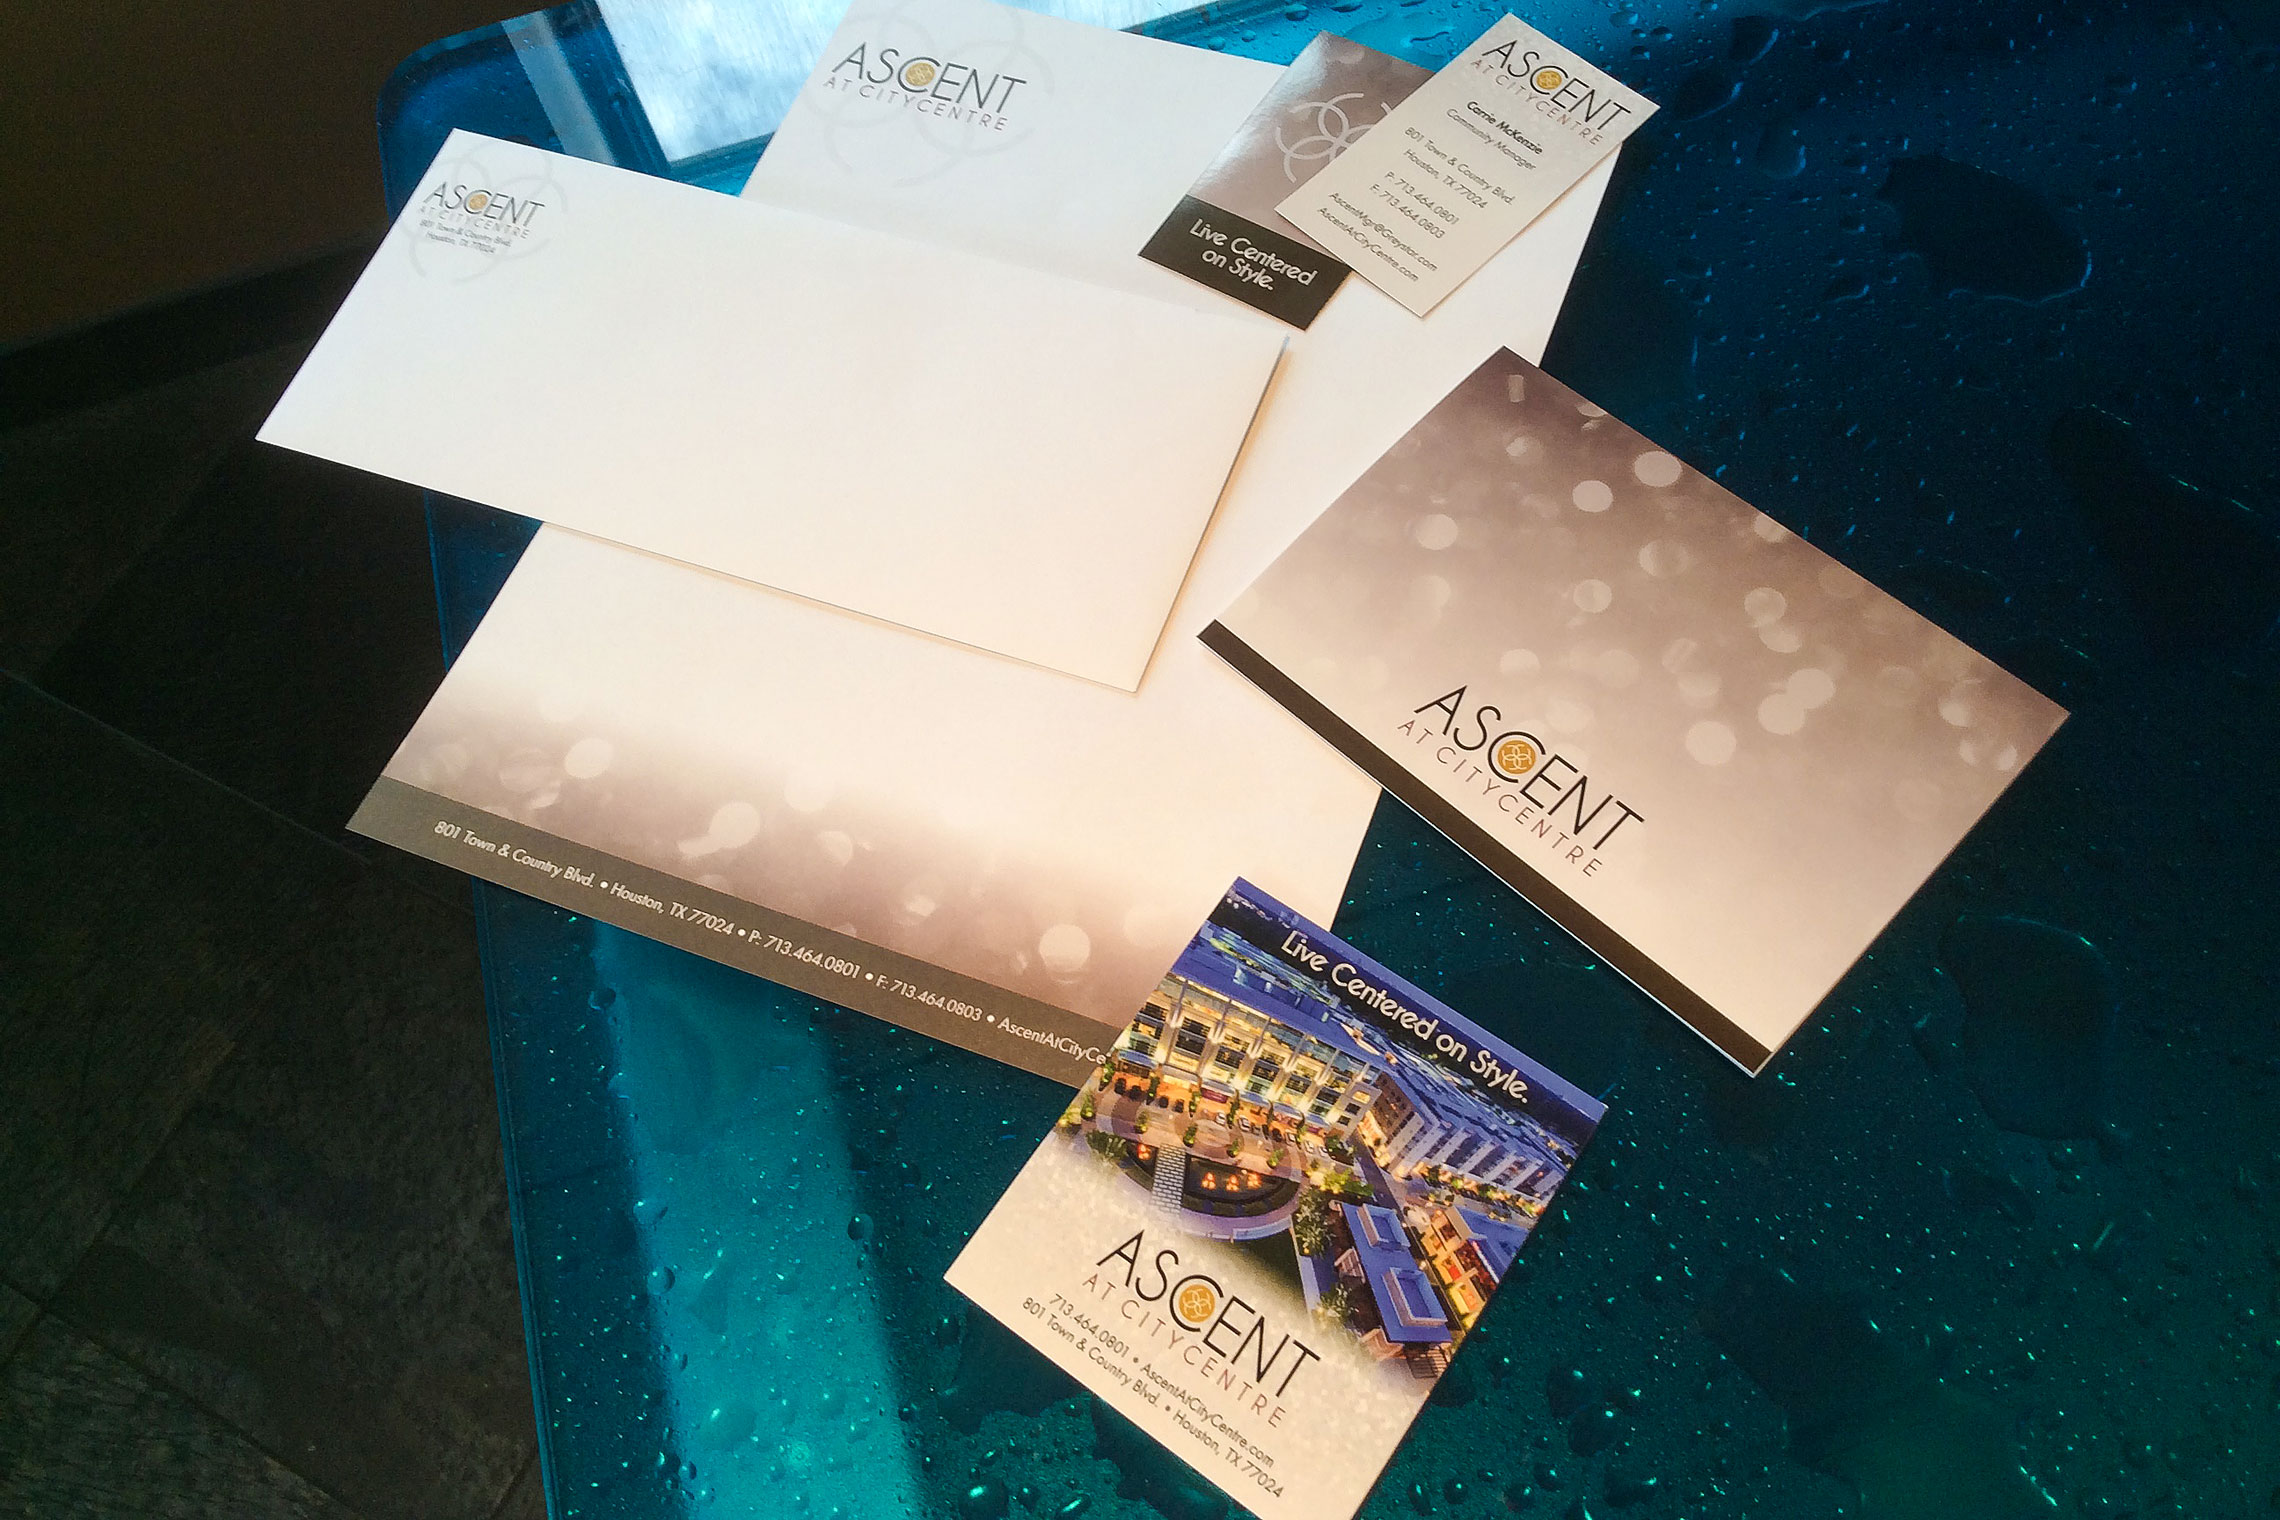 Ascent at CITYCENTRE Collateral - Amenity Fold-Out, Promo Card, Business Card, Letterhead and Envelope